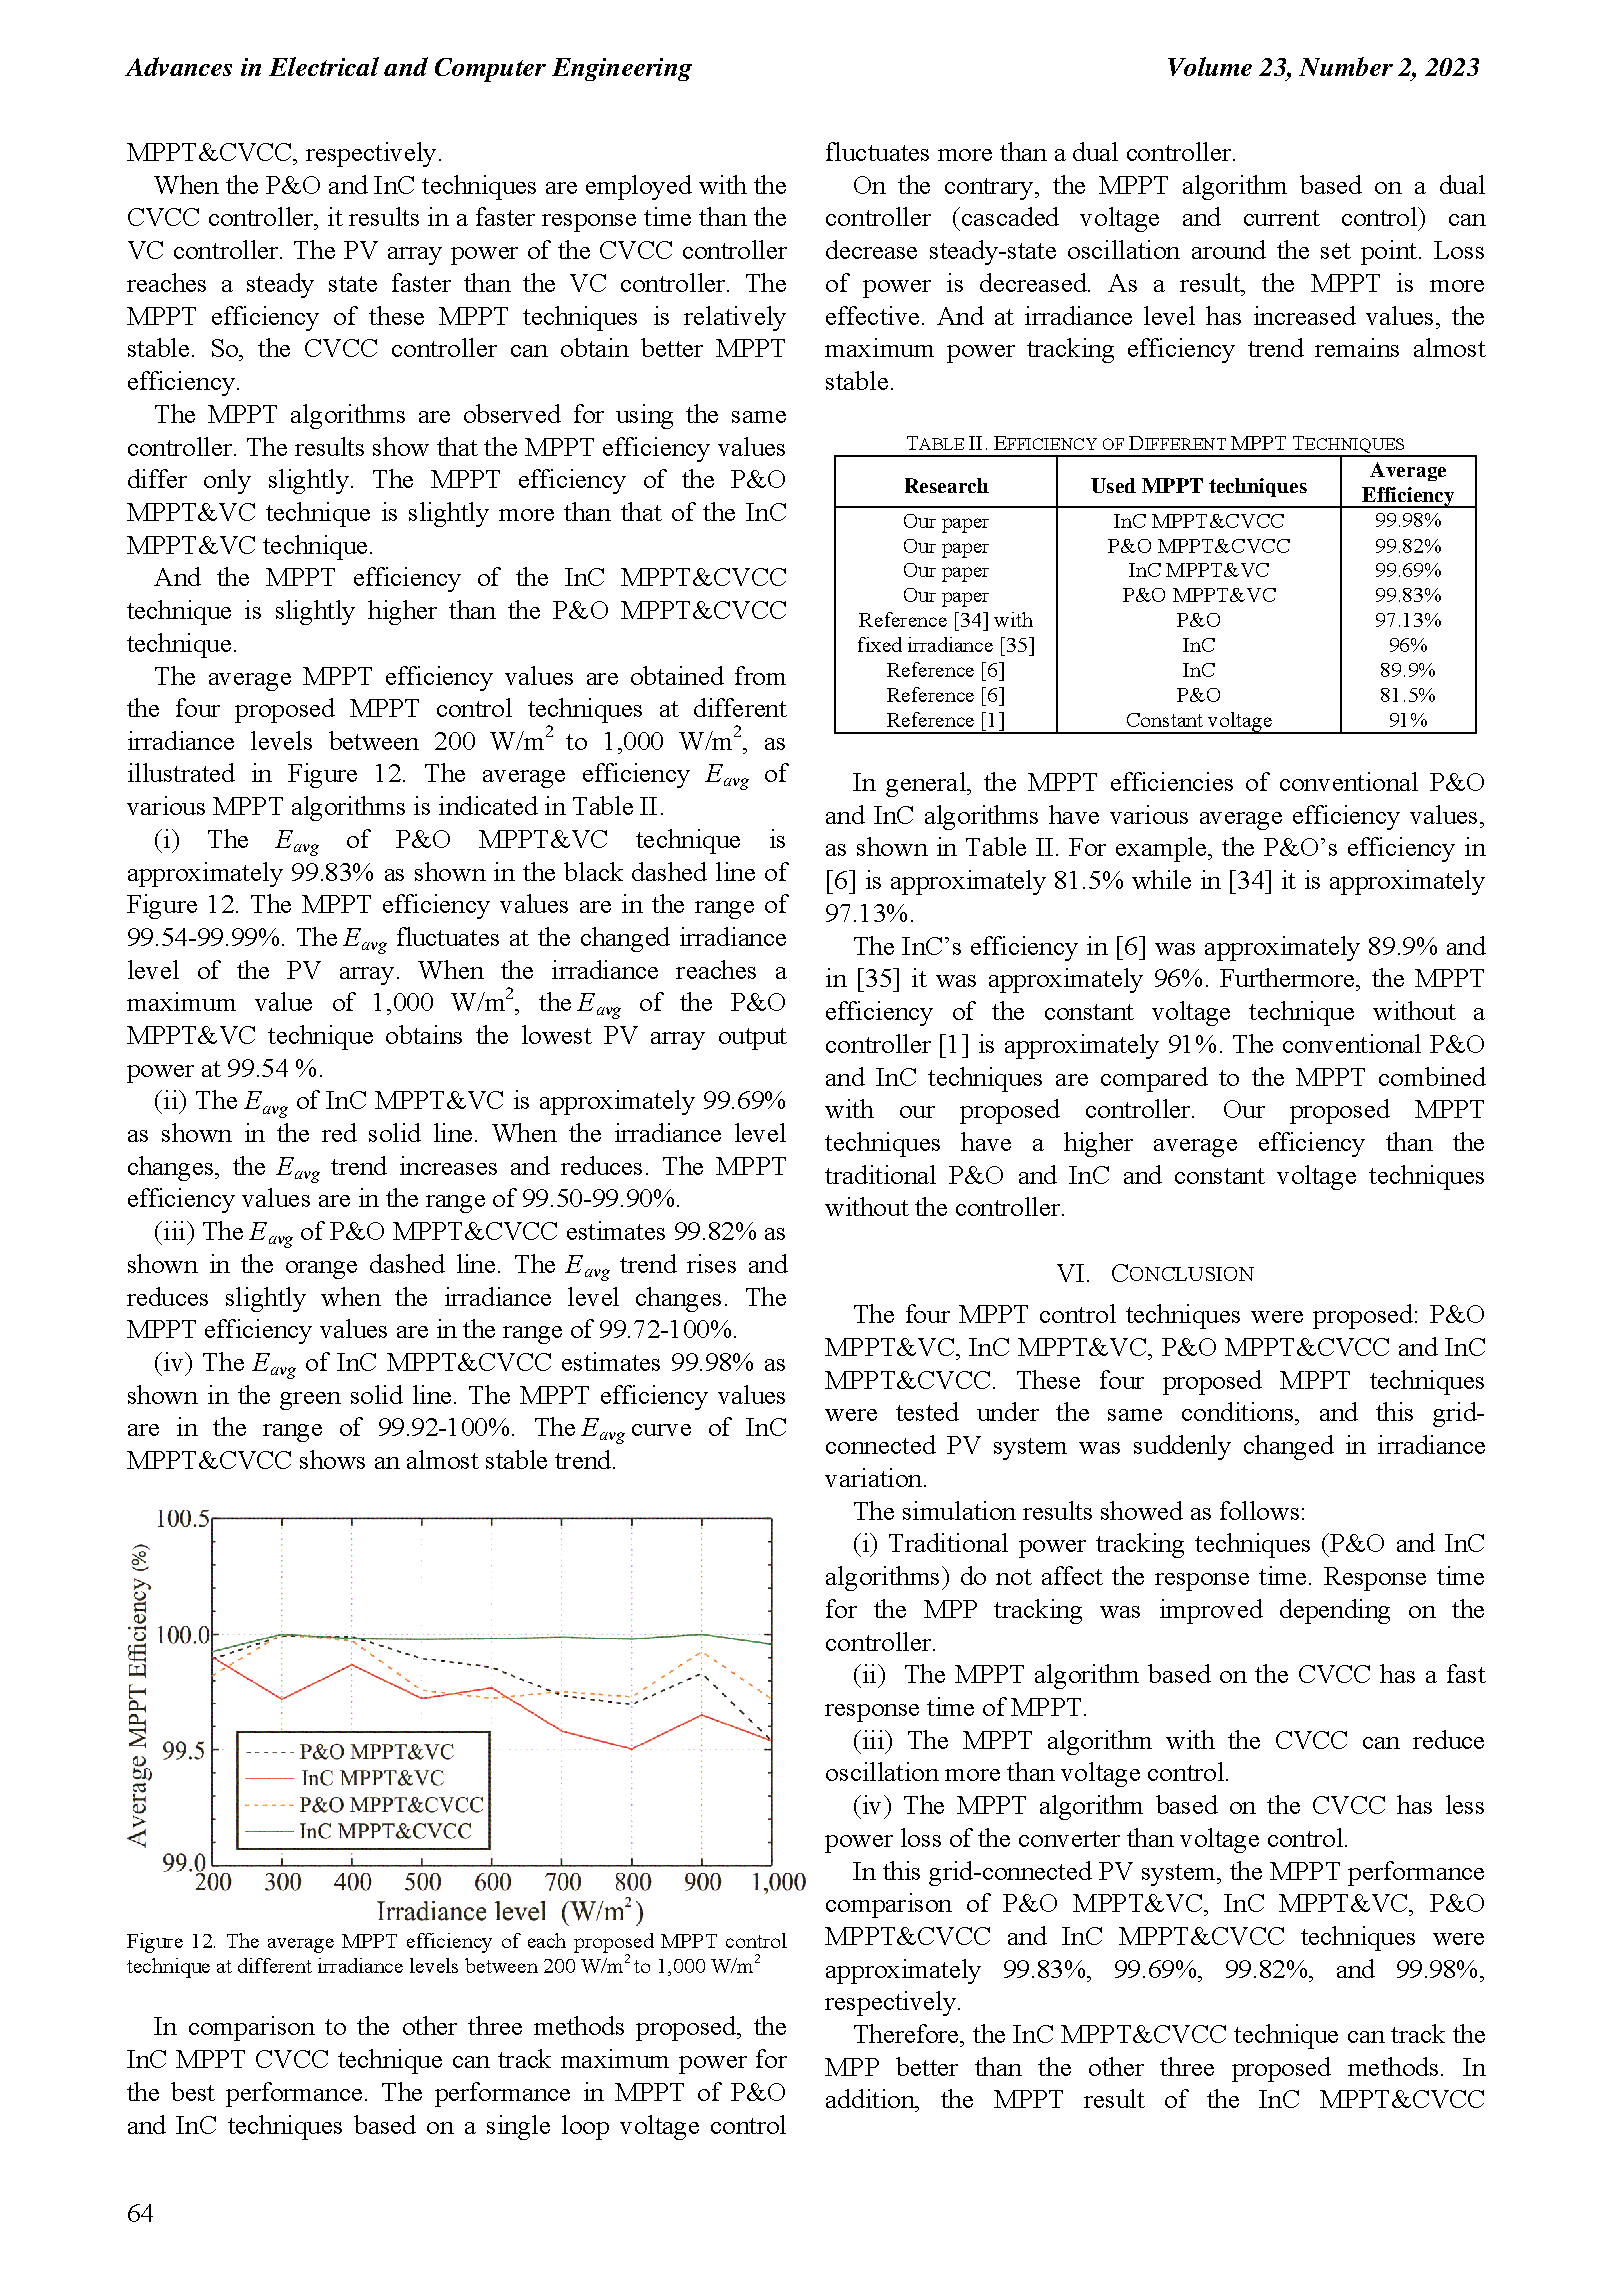 PDF Quickview for paper with DOI:10.4316/AECE.2023.02007